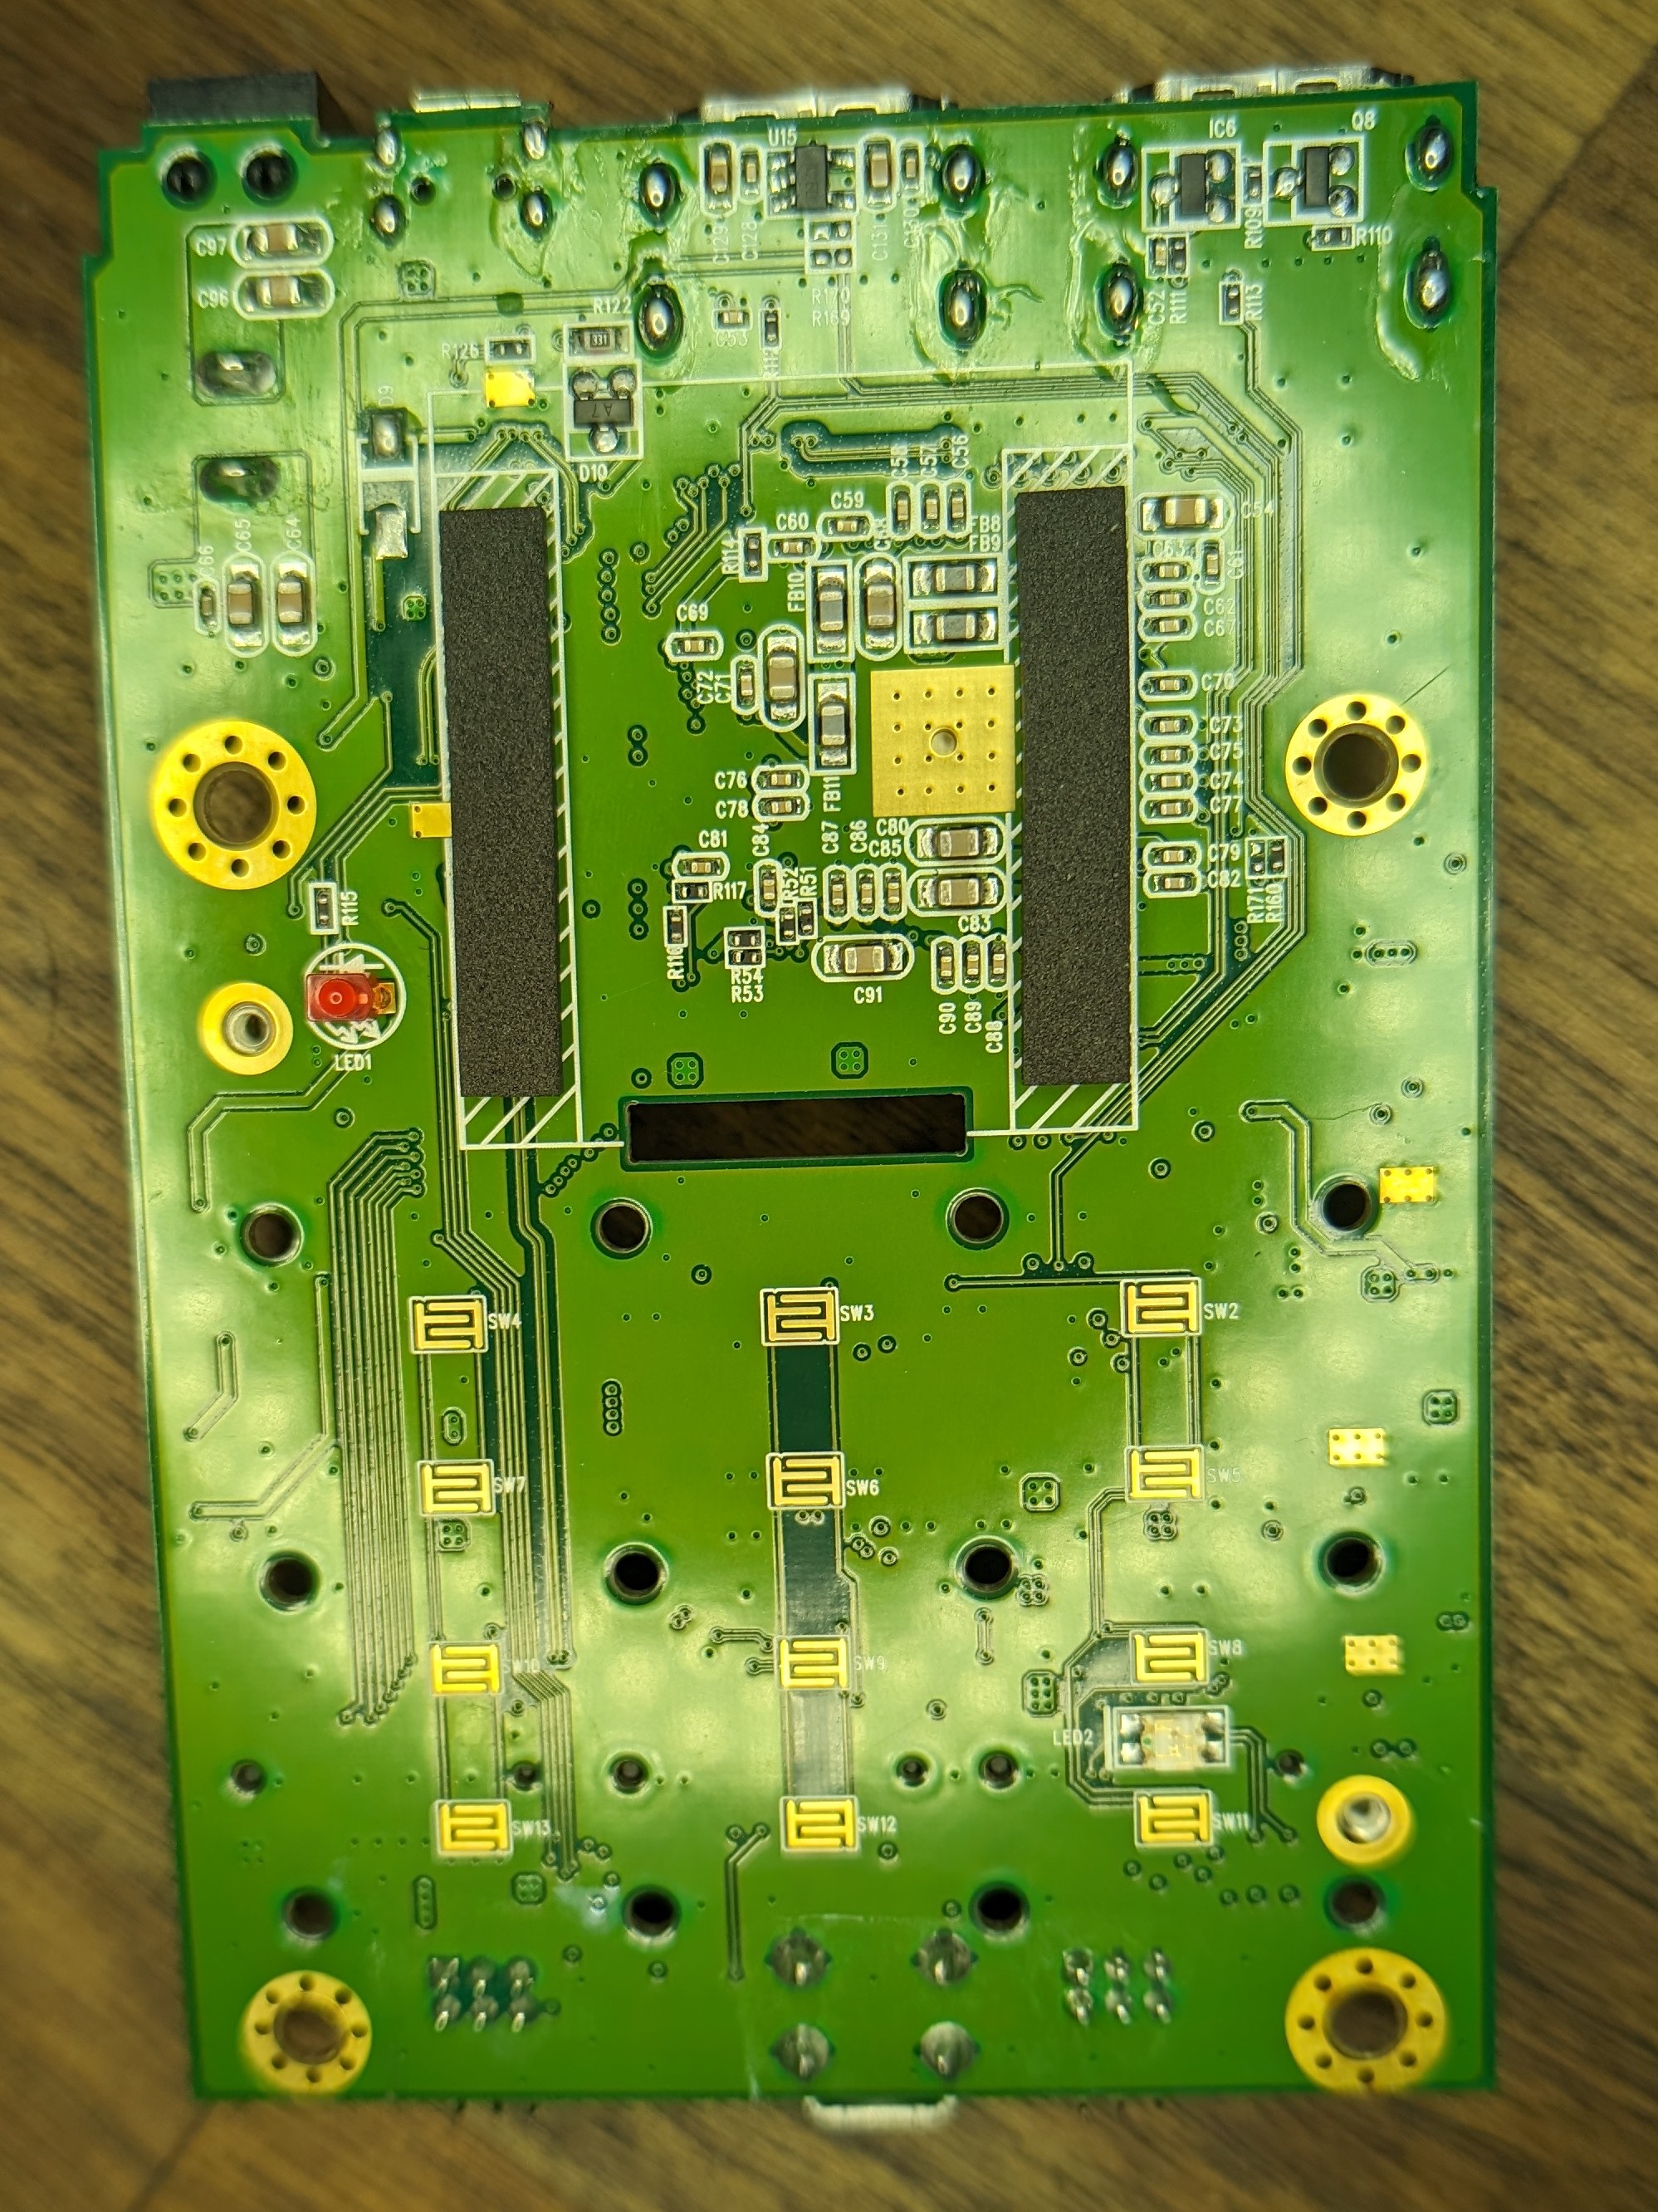 The side of the main PCB that faces the user from within.